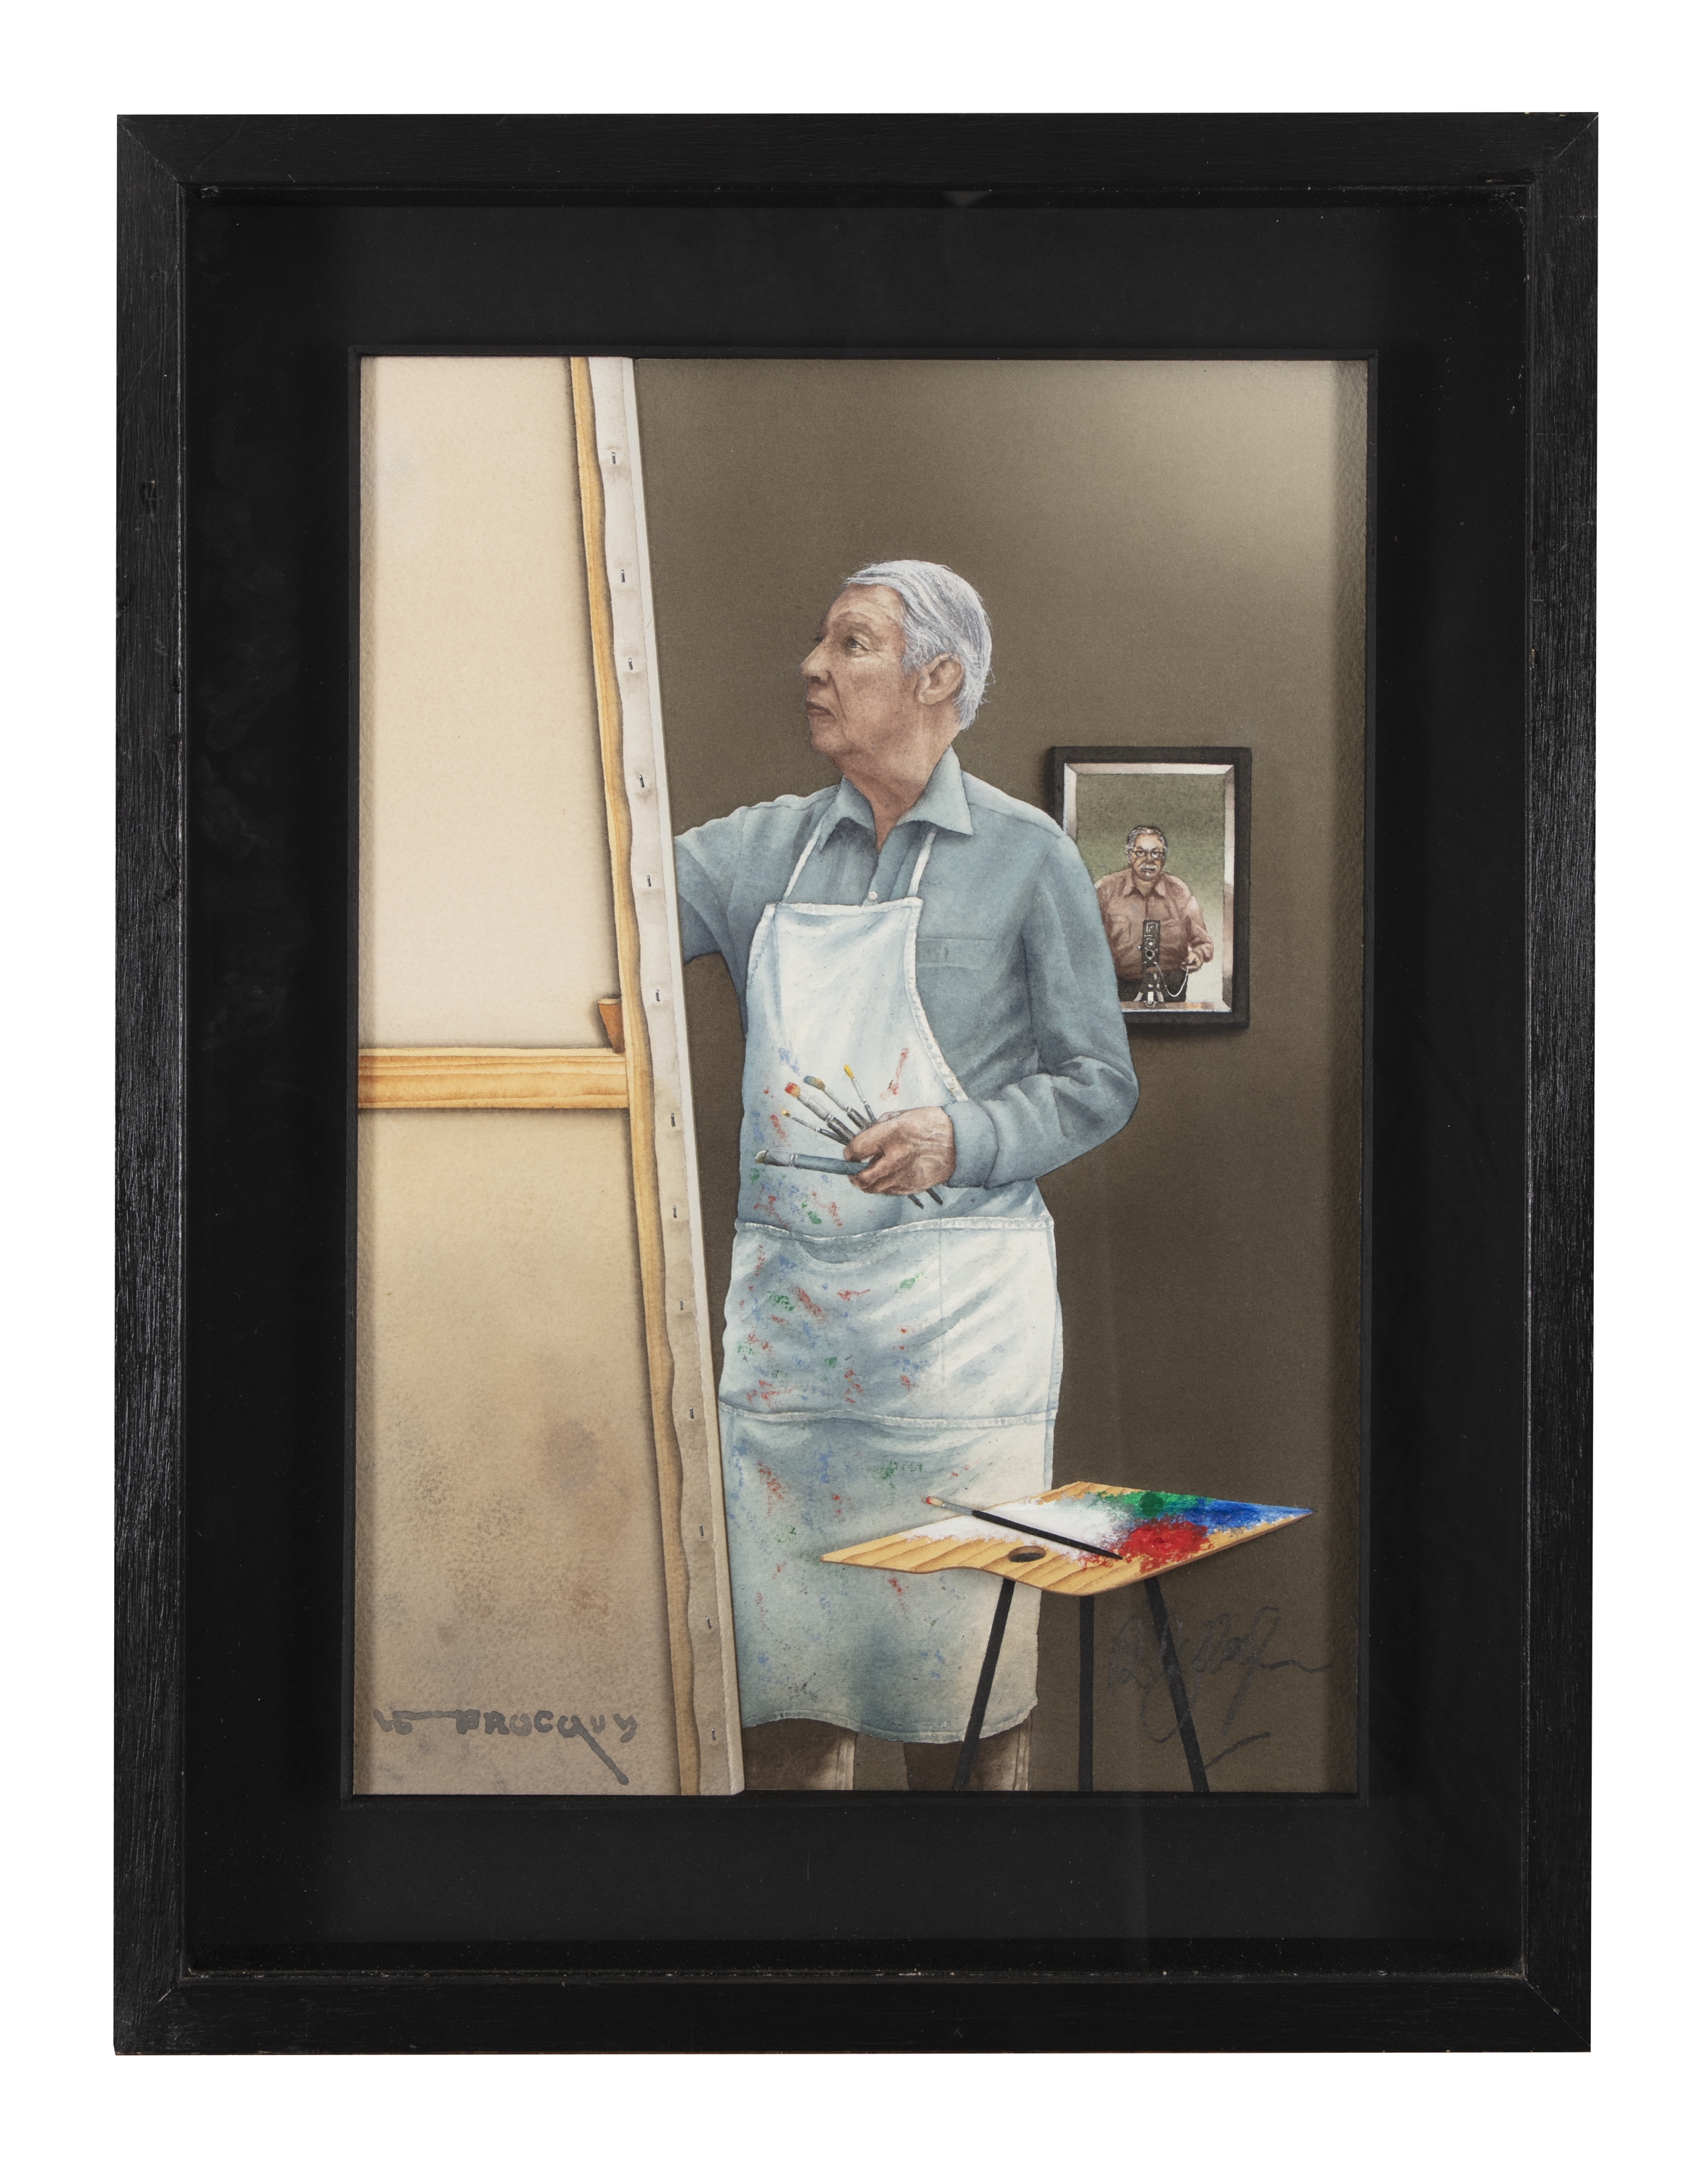 Artwork by Robert Ballagh, Robert Ballagh (b.1943)Portrait of Louis le BrocquyWatercolour and mixed media, Made of mixed media